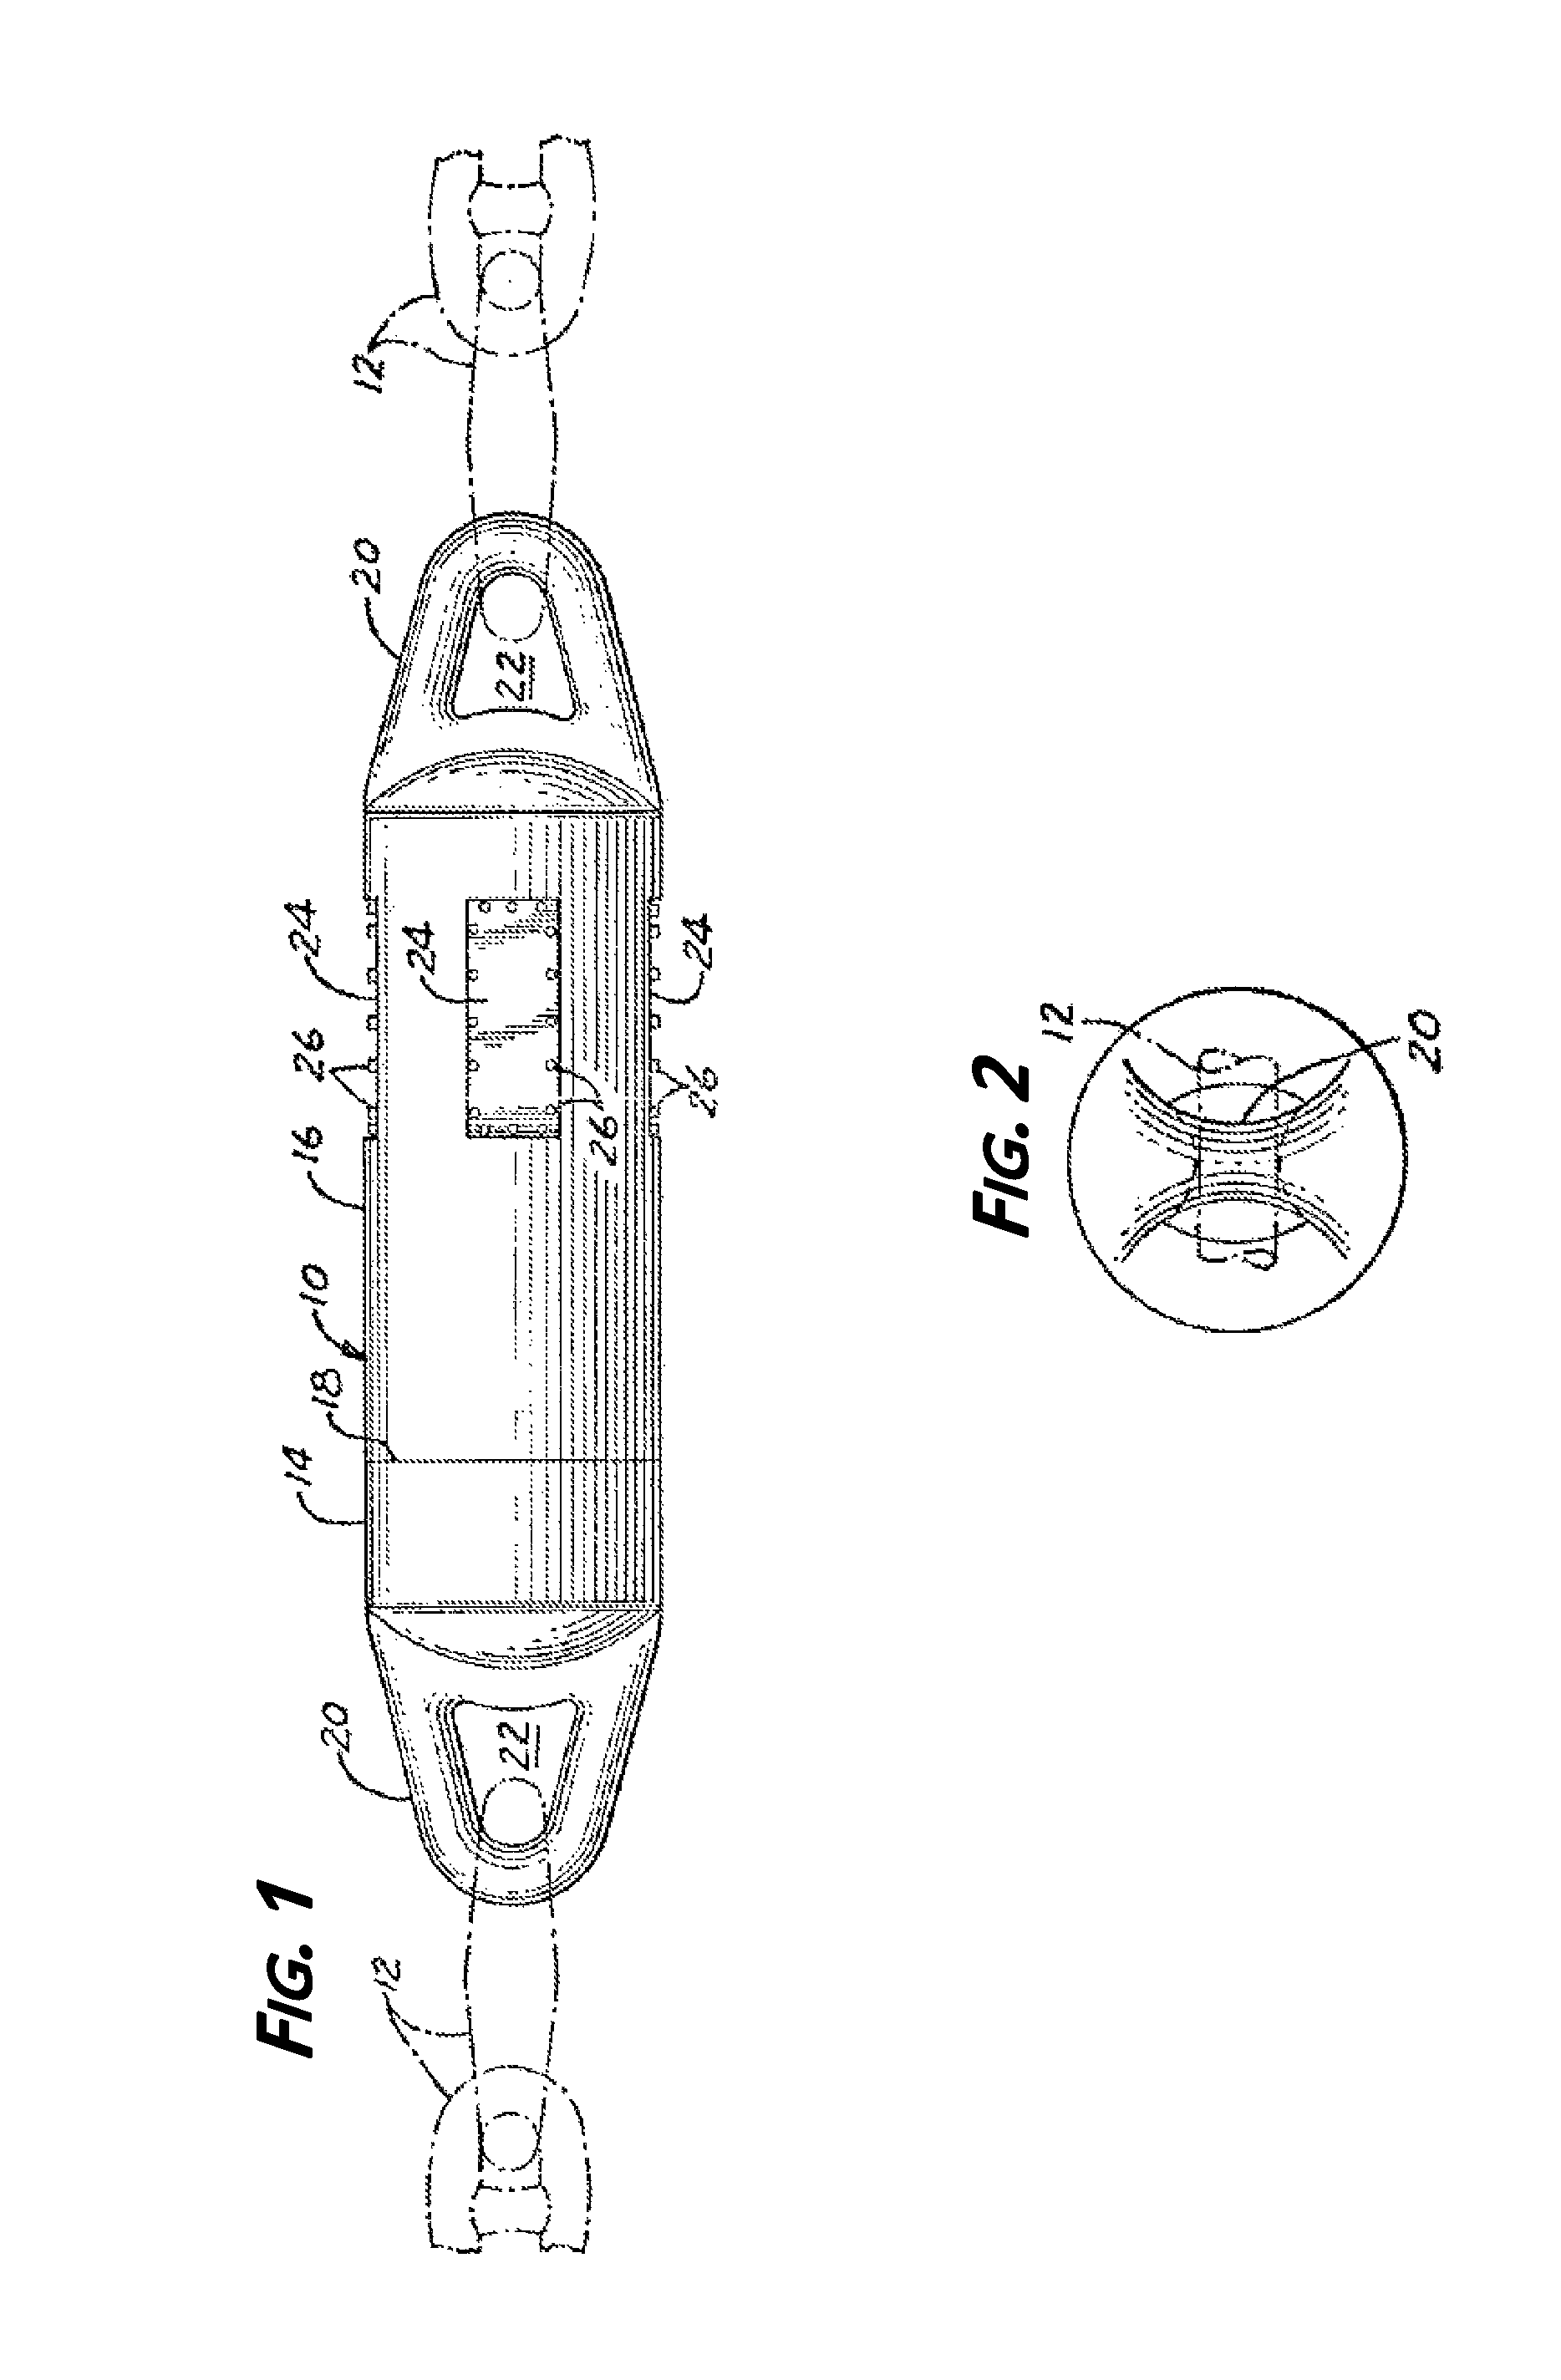 Release apparatuses with locking surfaces formed at contact angles and methods of manufacturing release apparatuses